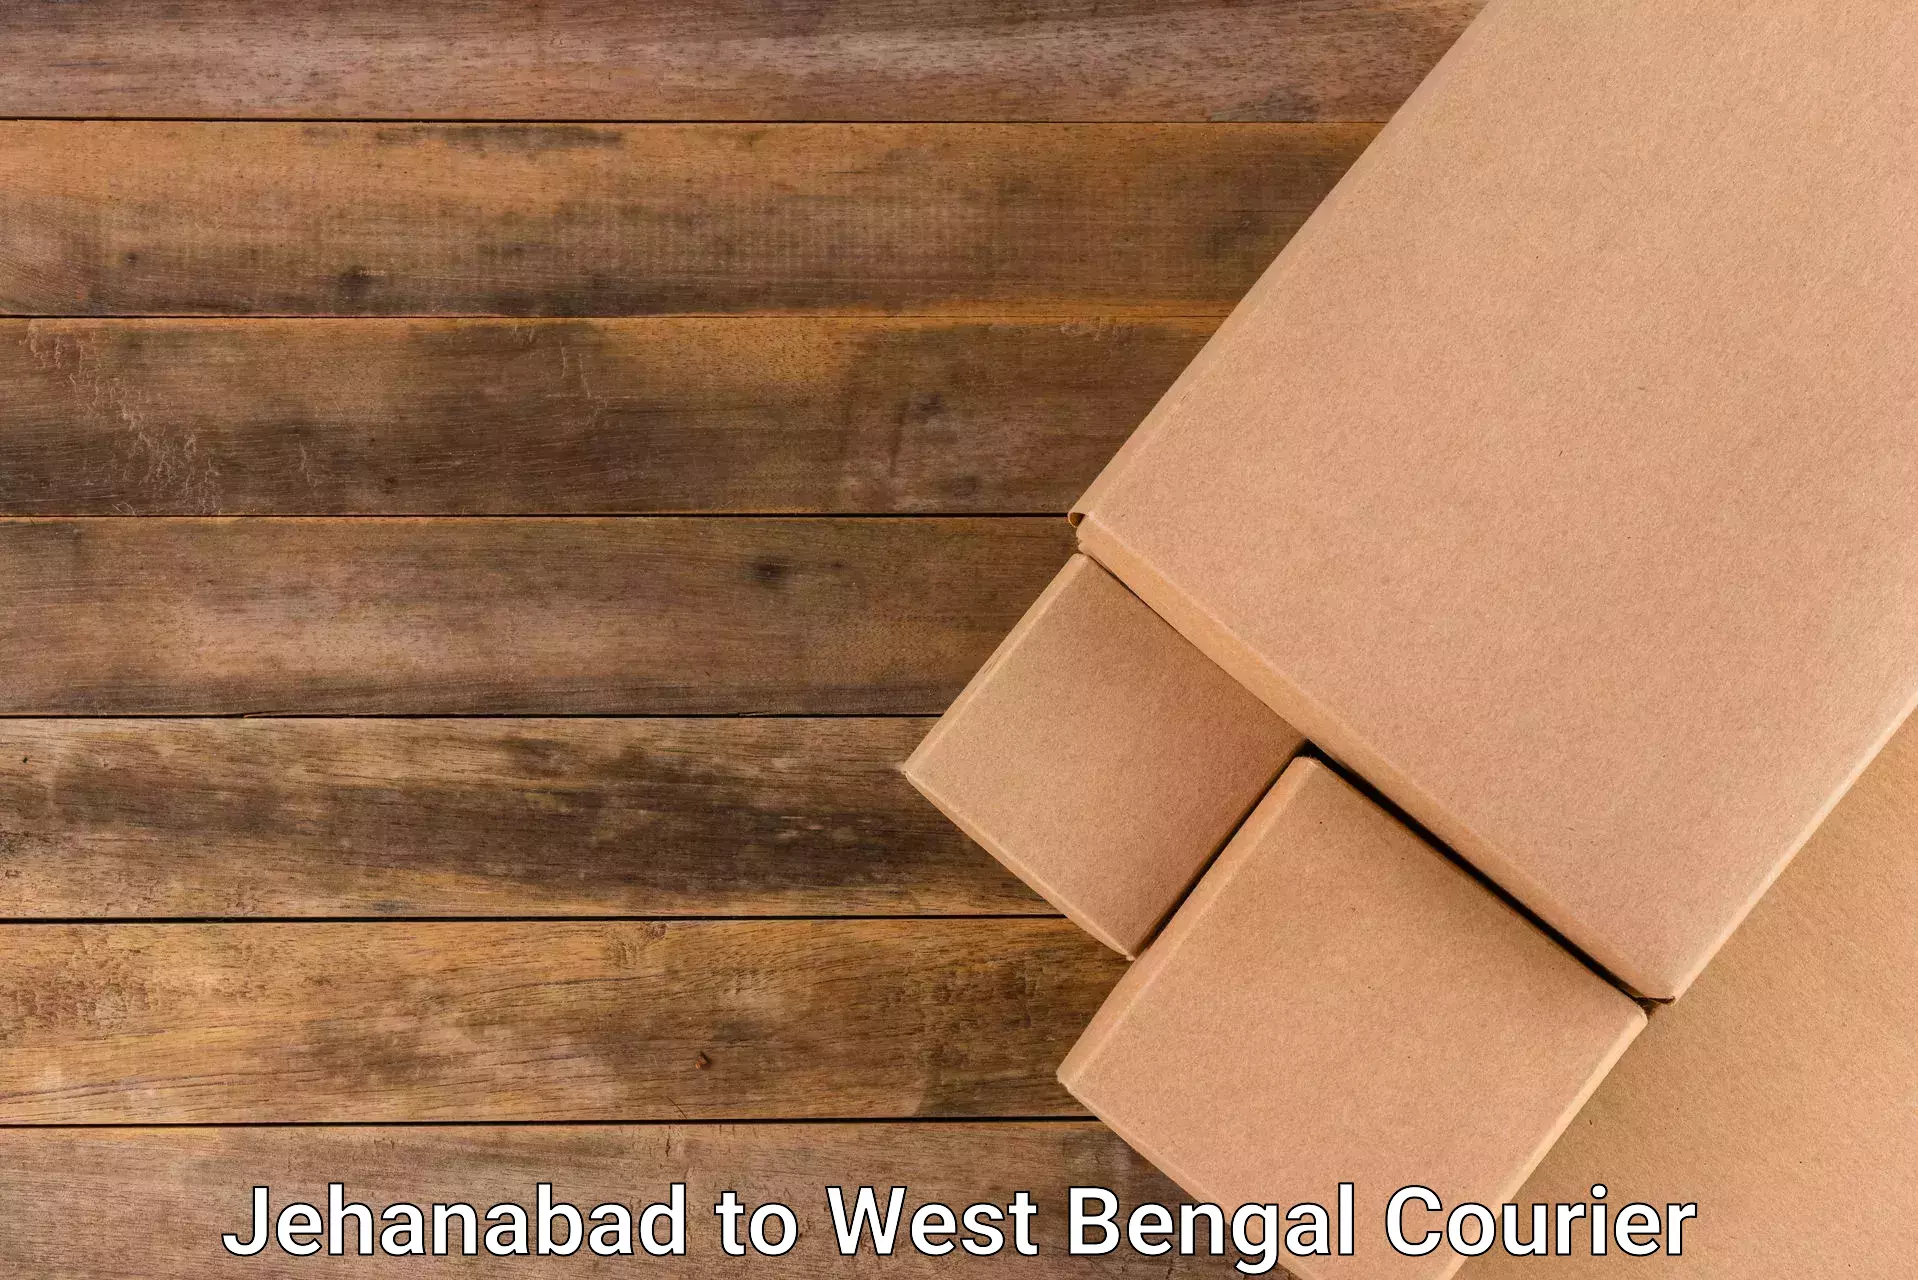 Courier service booking Jehanabad to Hemtabad